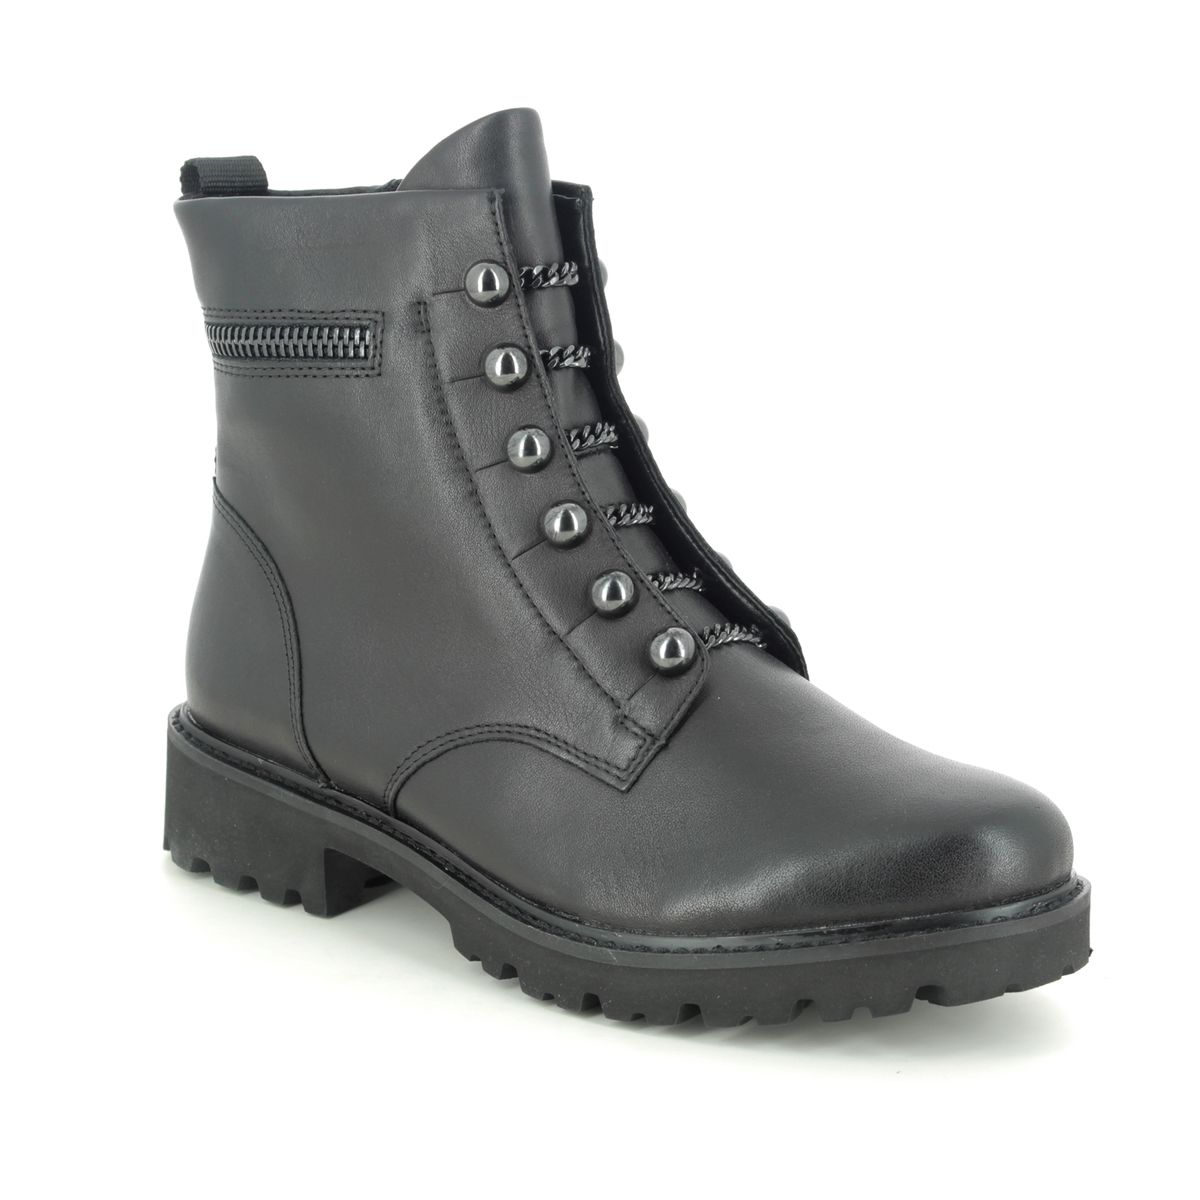 Remonte Docland Black Leather Womens Biker Boots D8670-01 In Size 37 In Plain Black Leather